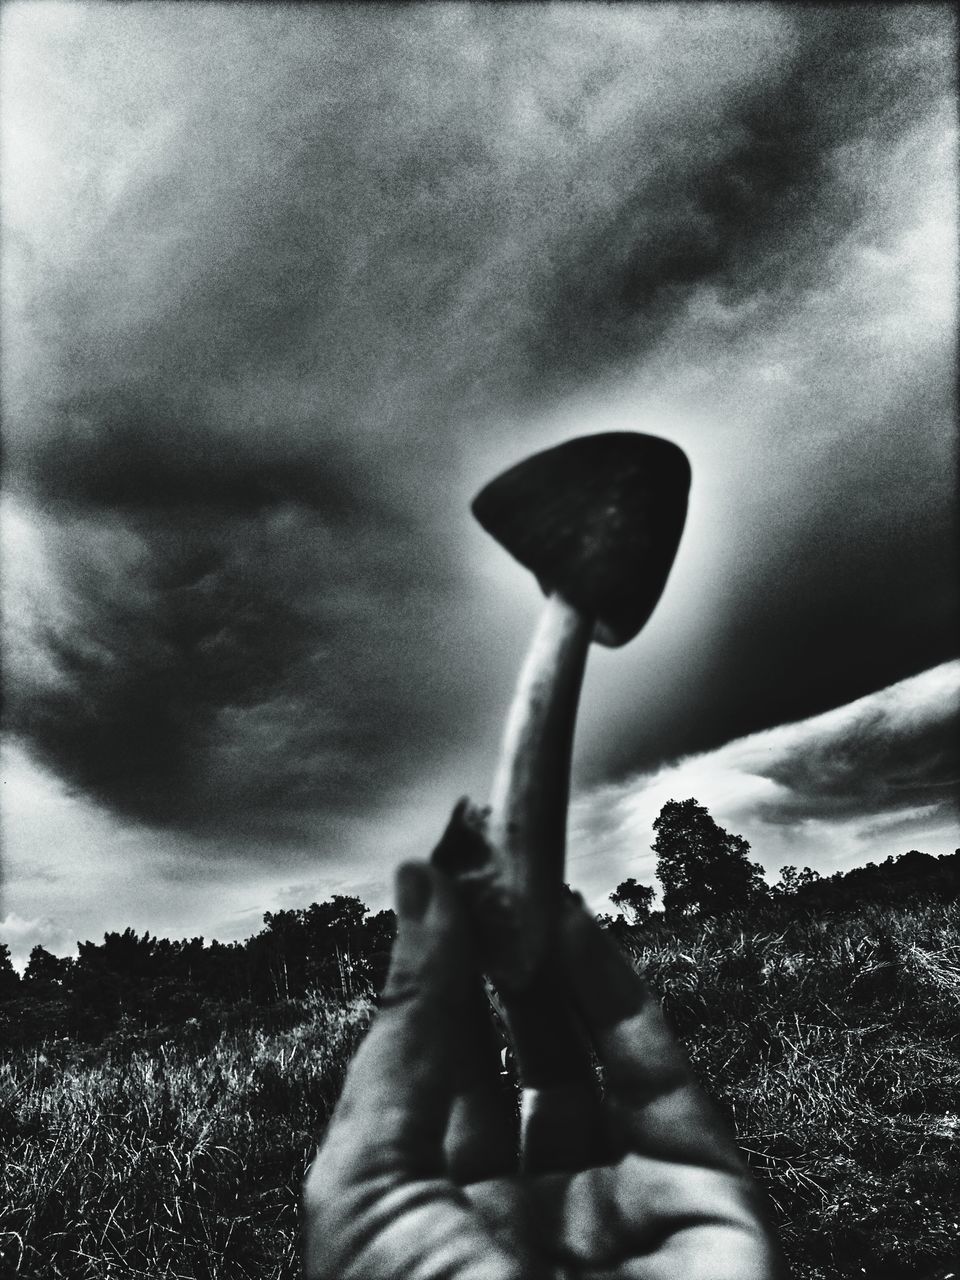 darkness, black and white, black, cloud, sky, monochrome photography, hand, one person, monochrome, nature, holding, white, tree, auto post production filter, plant, light, personal perspective, adult, outdoors, leisure activity, lifestyles, day